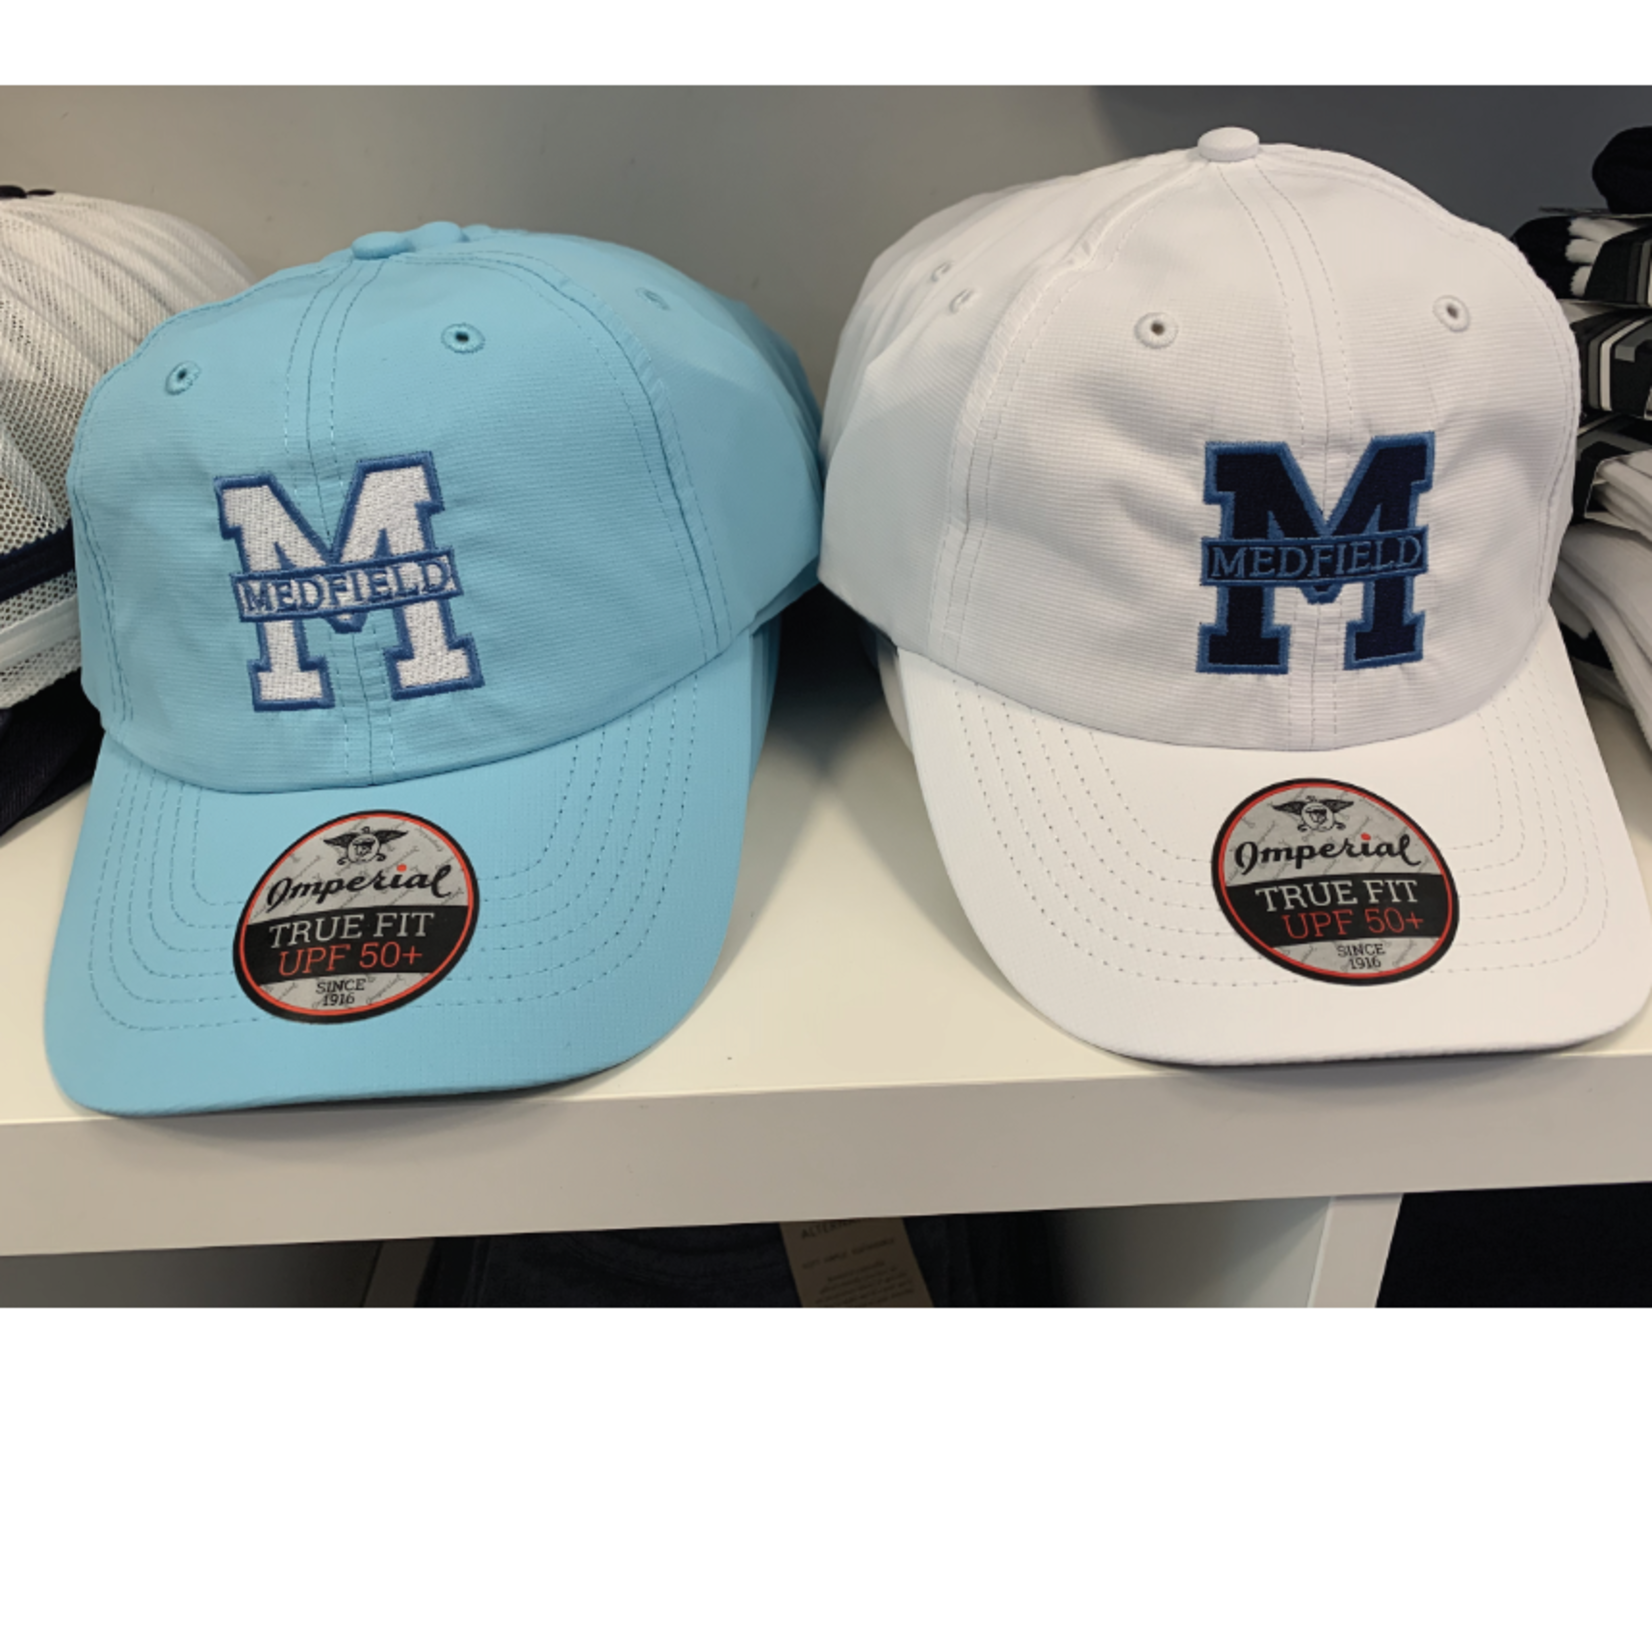 Imperial - M Hat with Medfield X210P